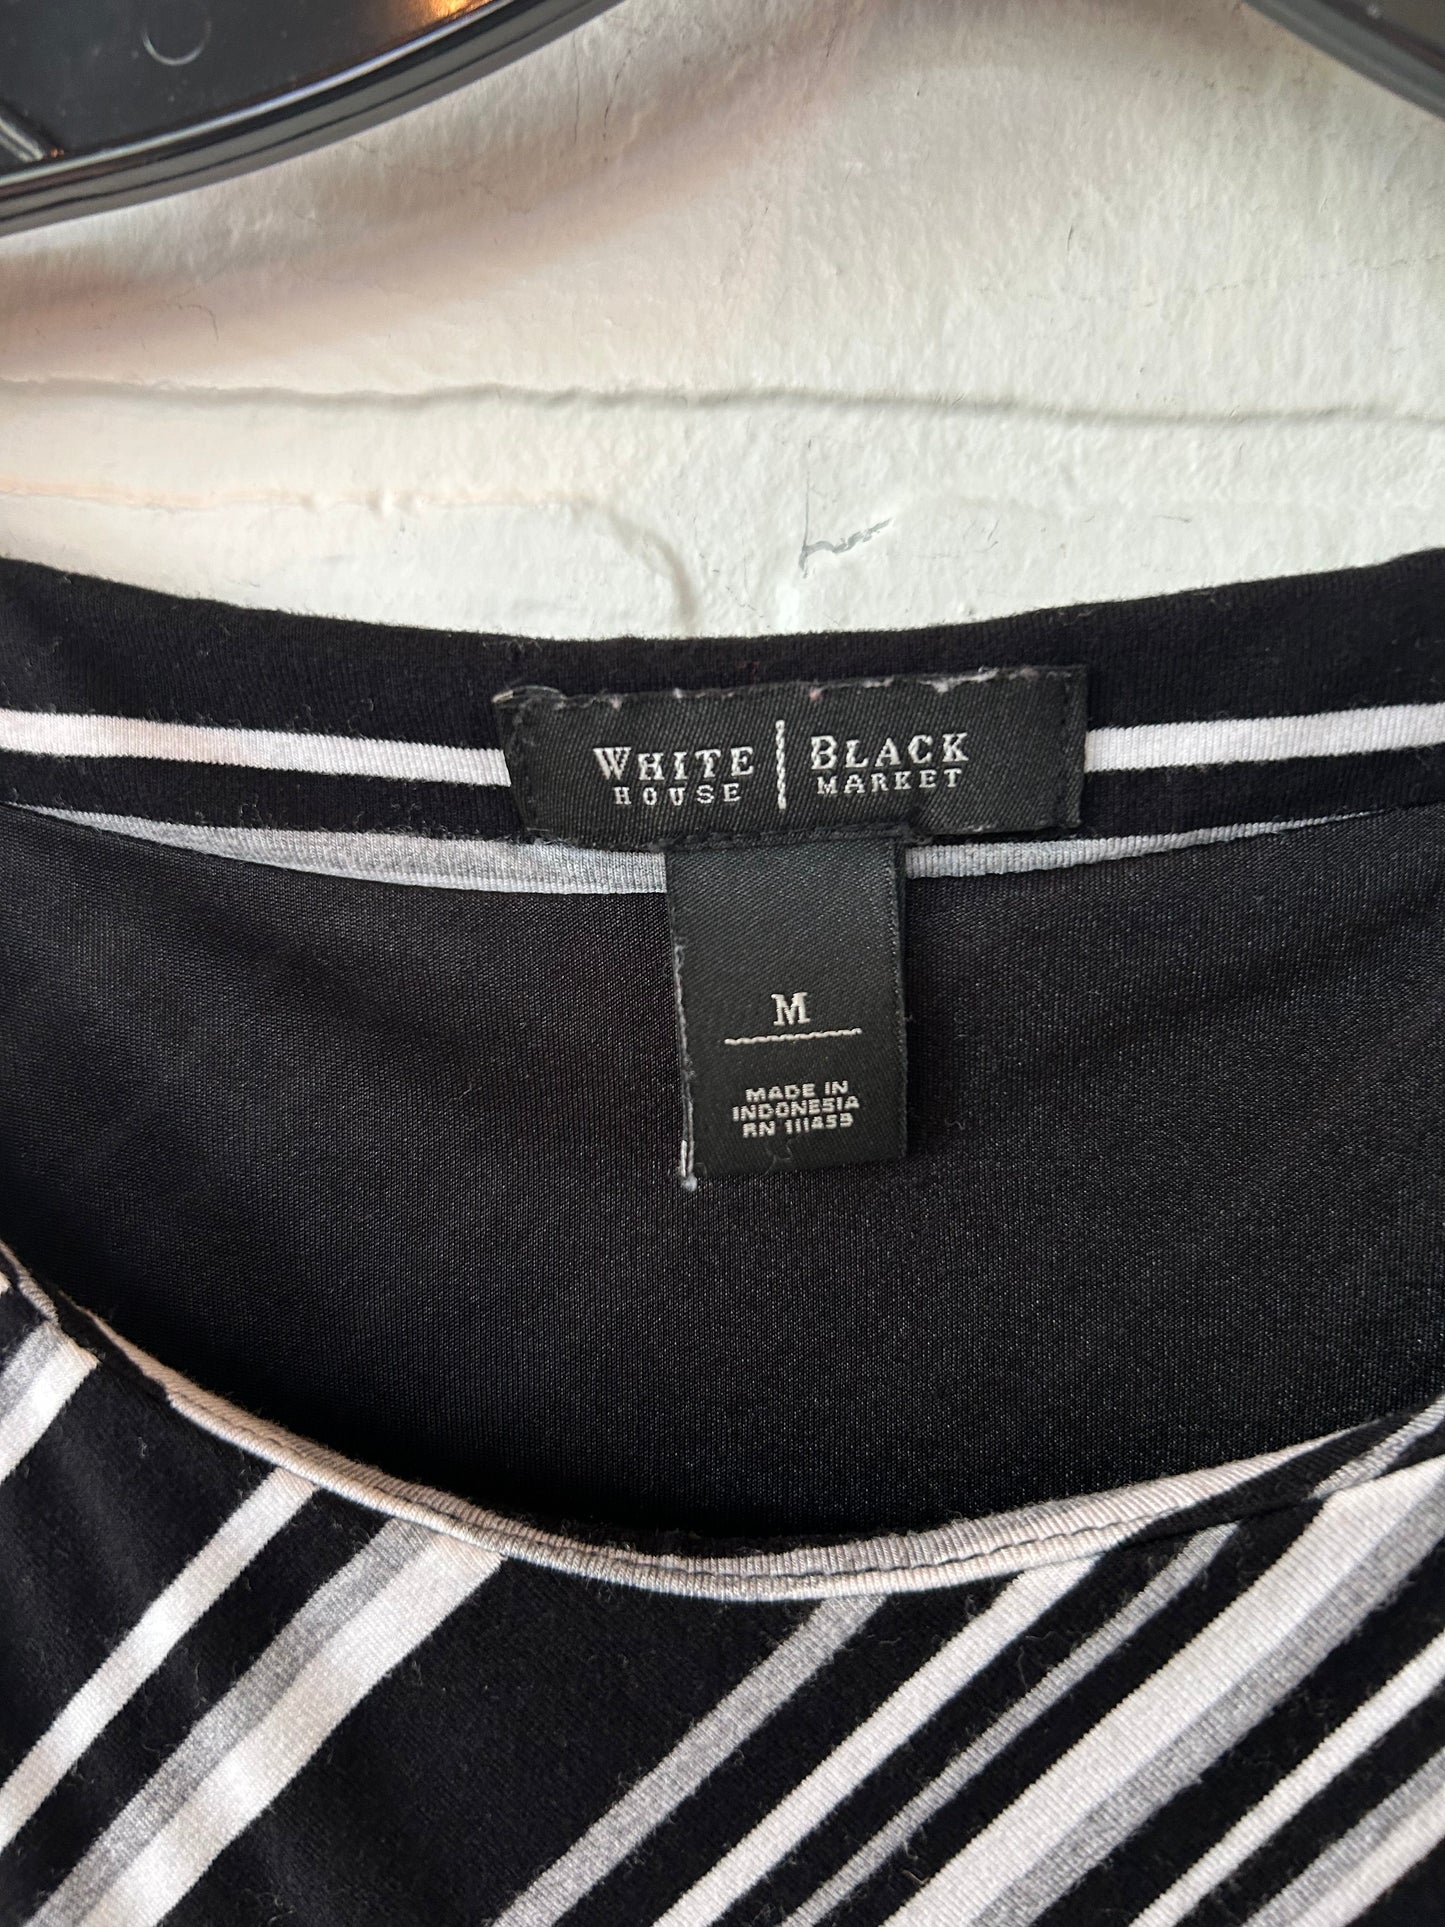 Dress Casual Short By White House Black Market  Size: M